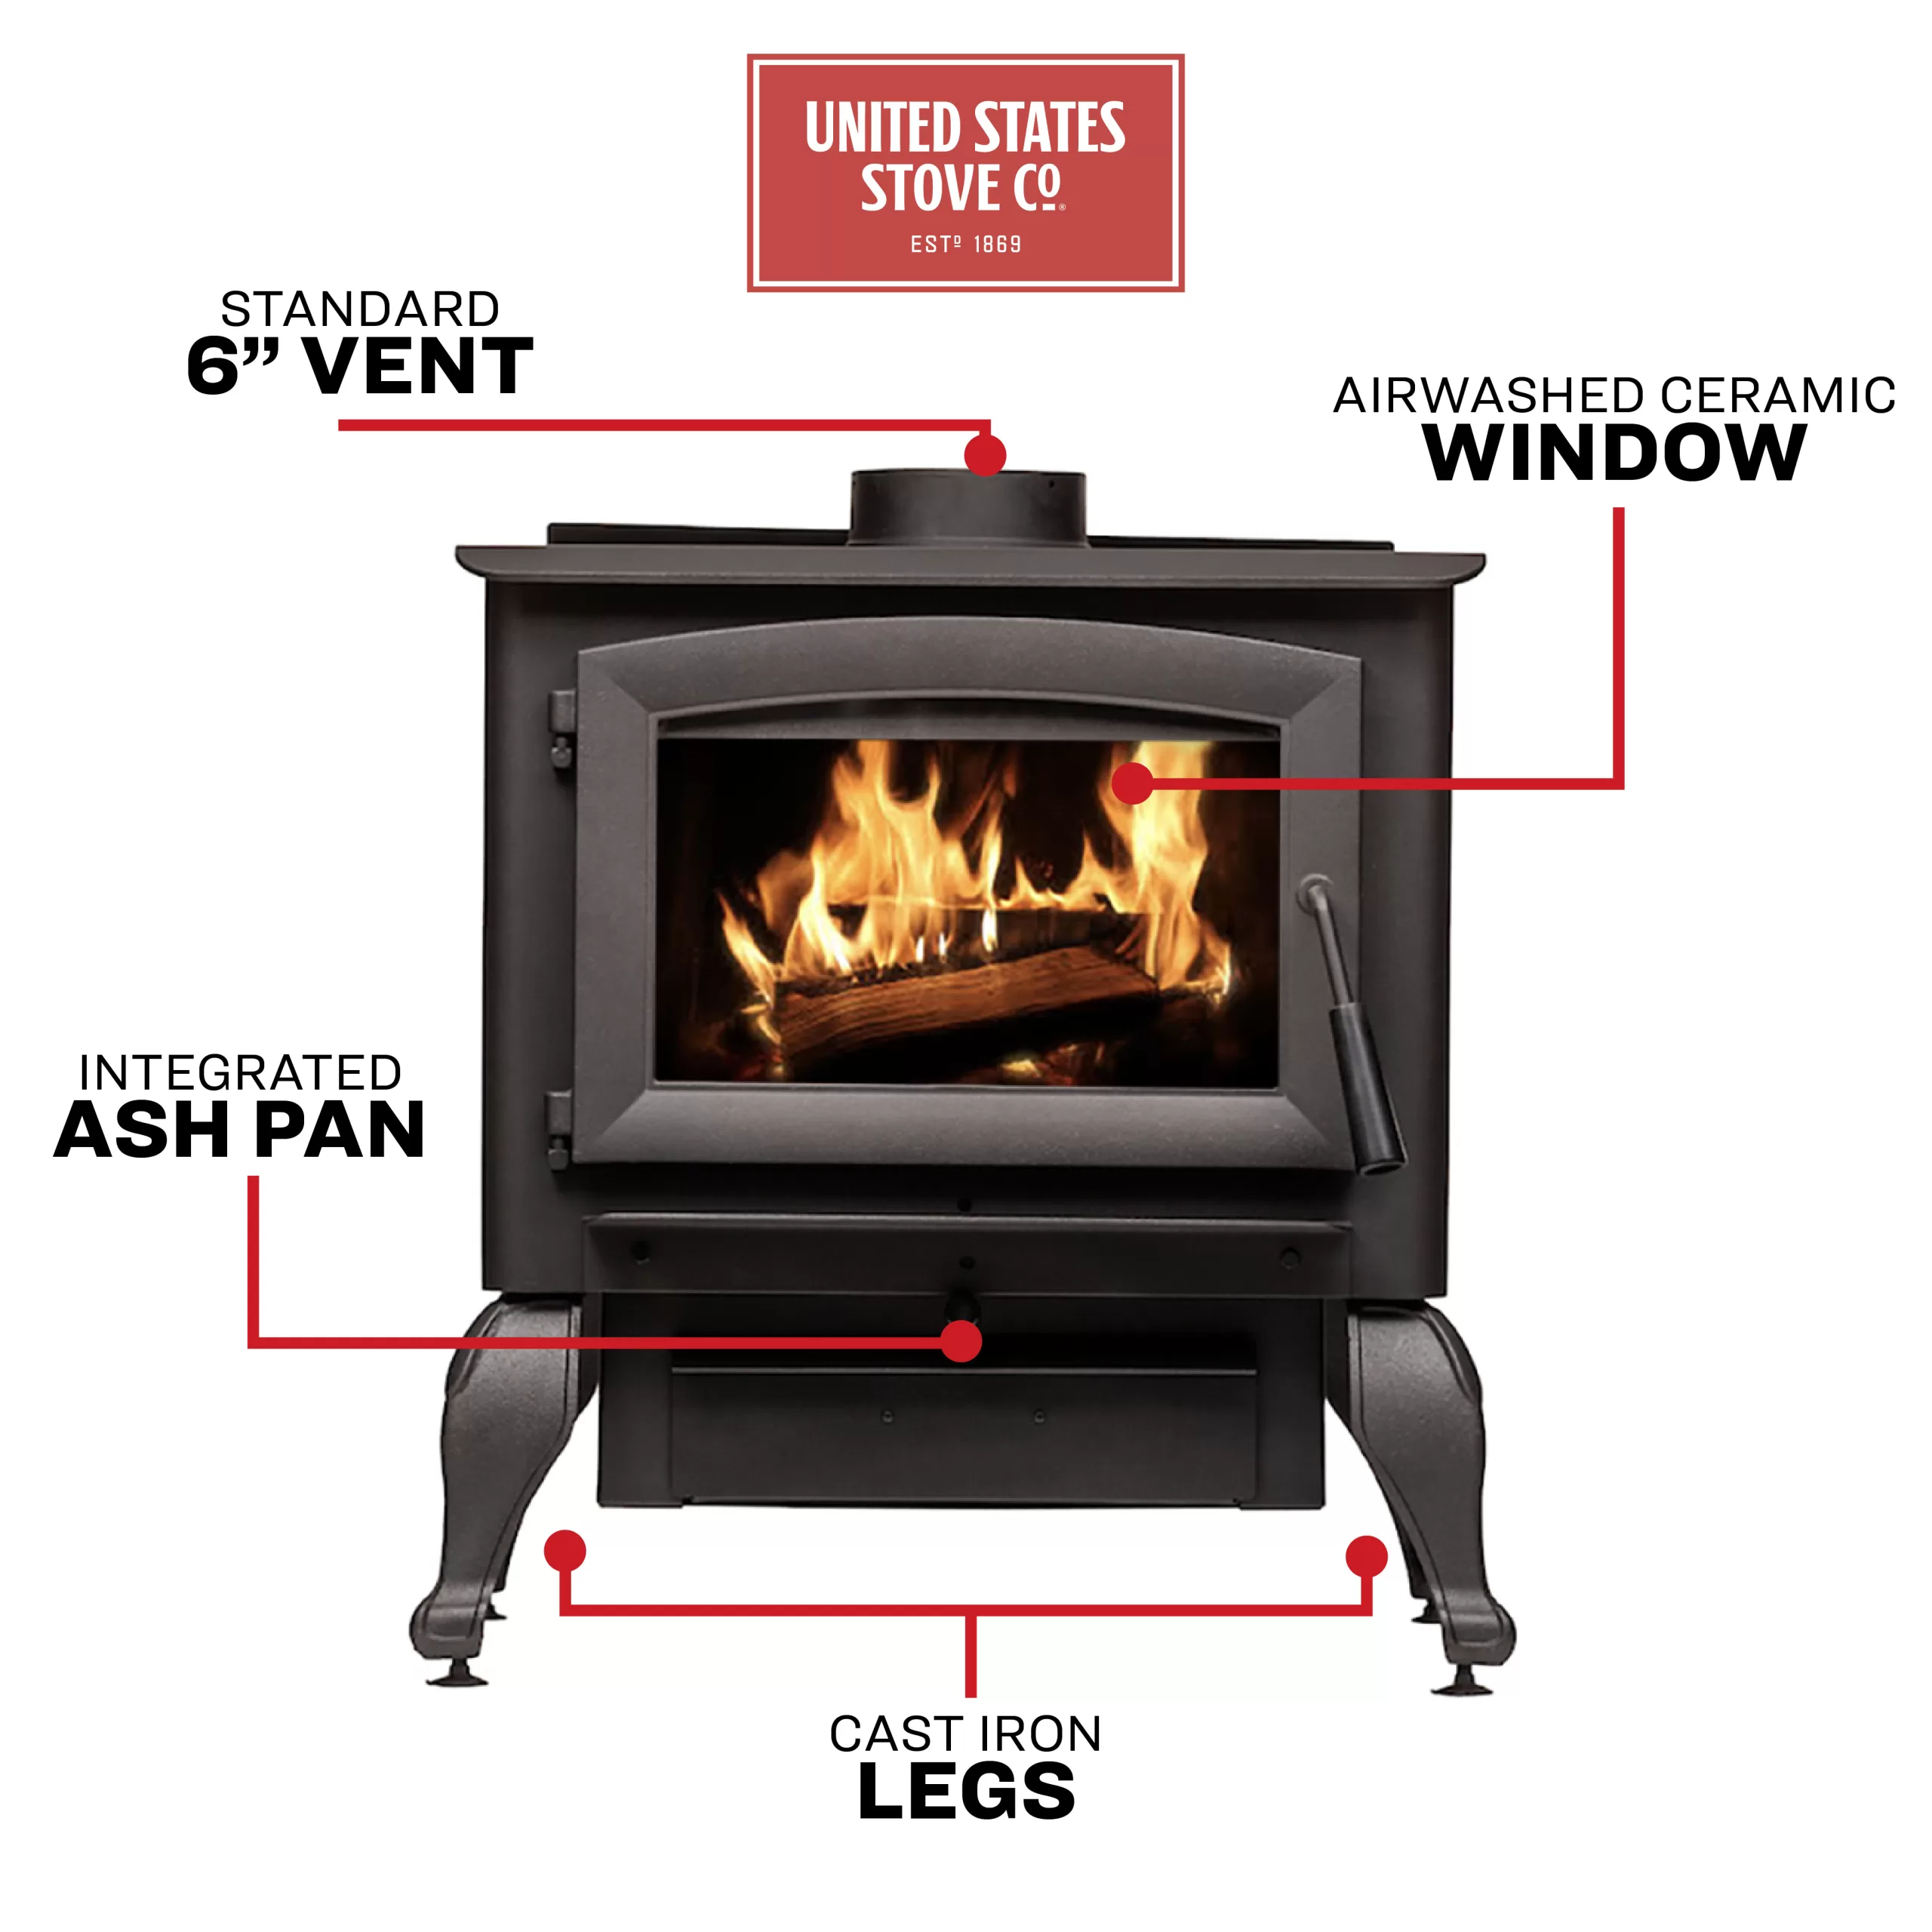 Benefits of a Cast Iron Stove - Ann Arbor MI - Clean Sweeps of Michigan